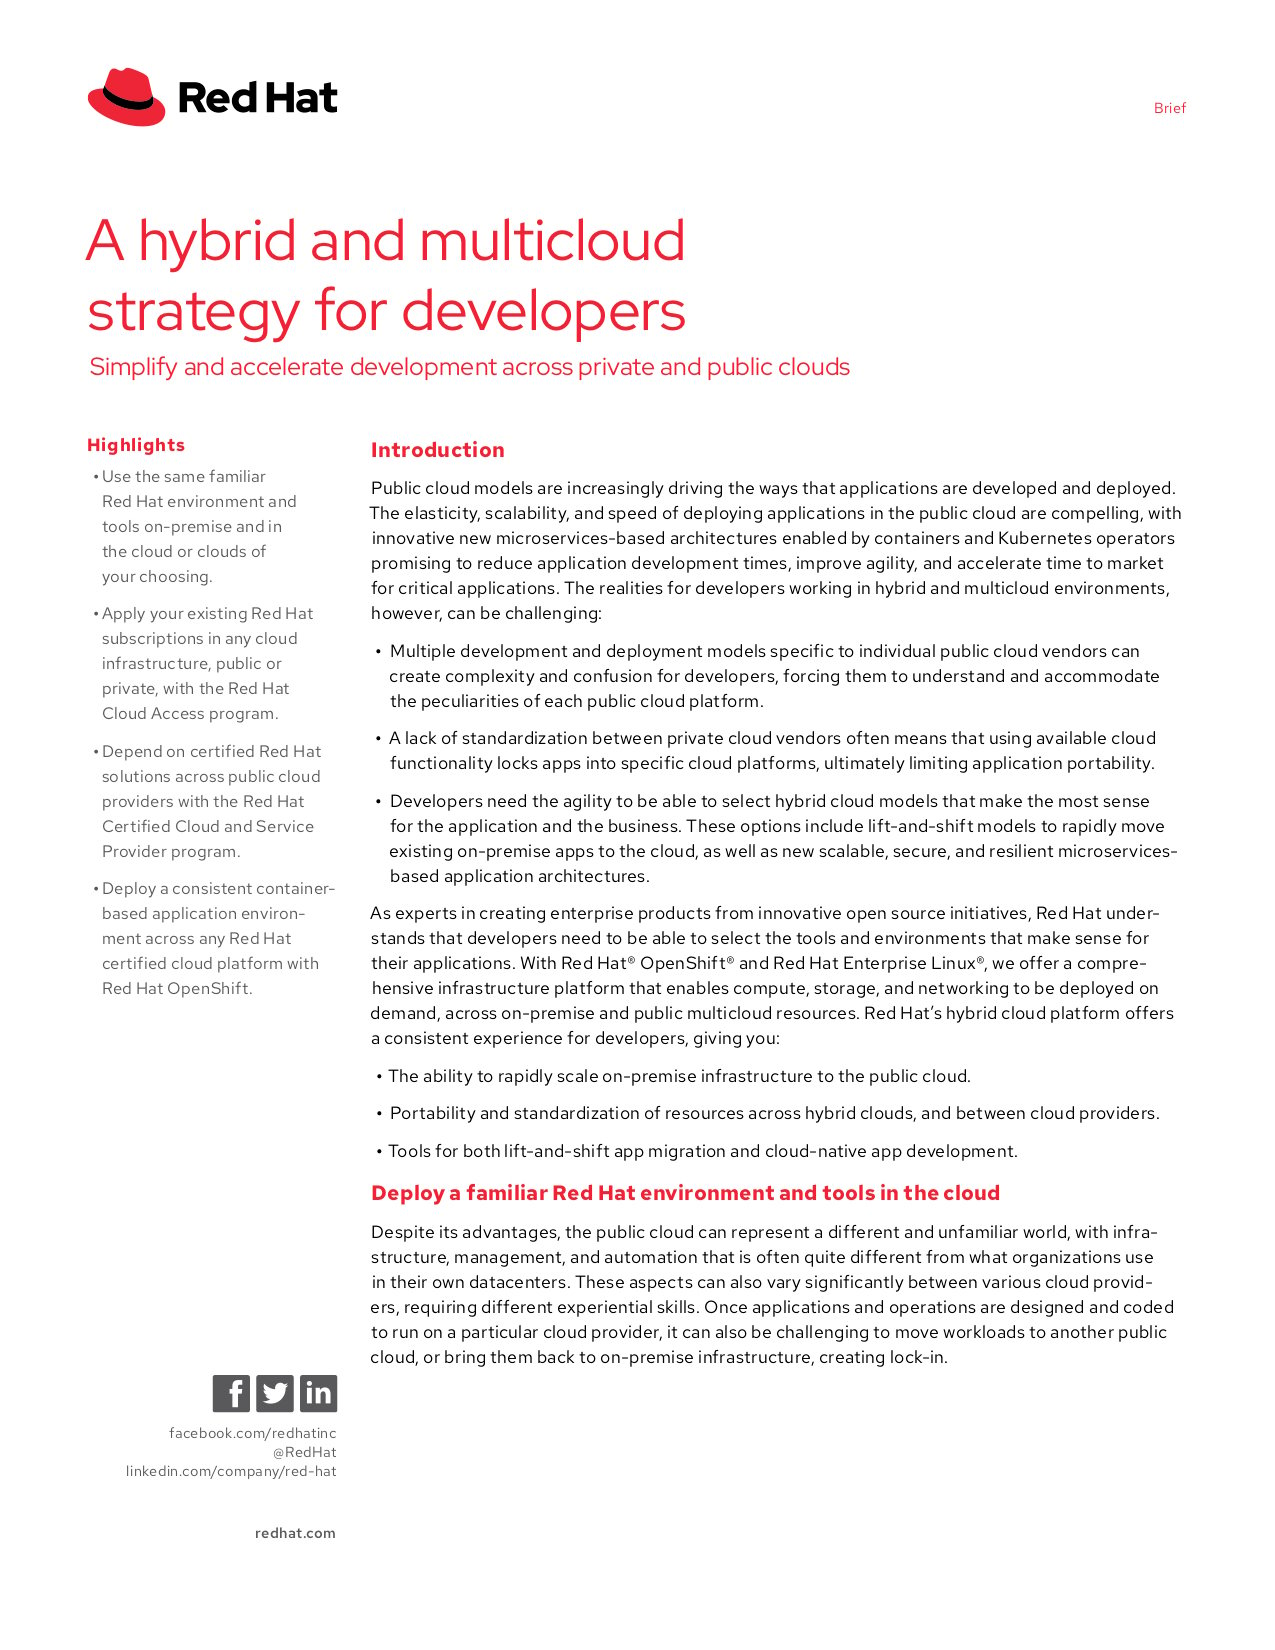 A Hybrid and Multicloud Strategy for Developers_cover